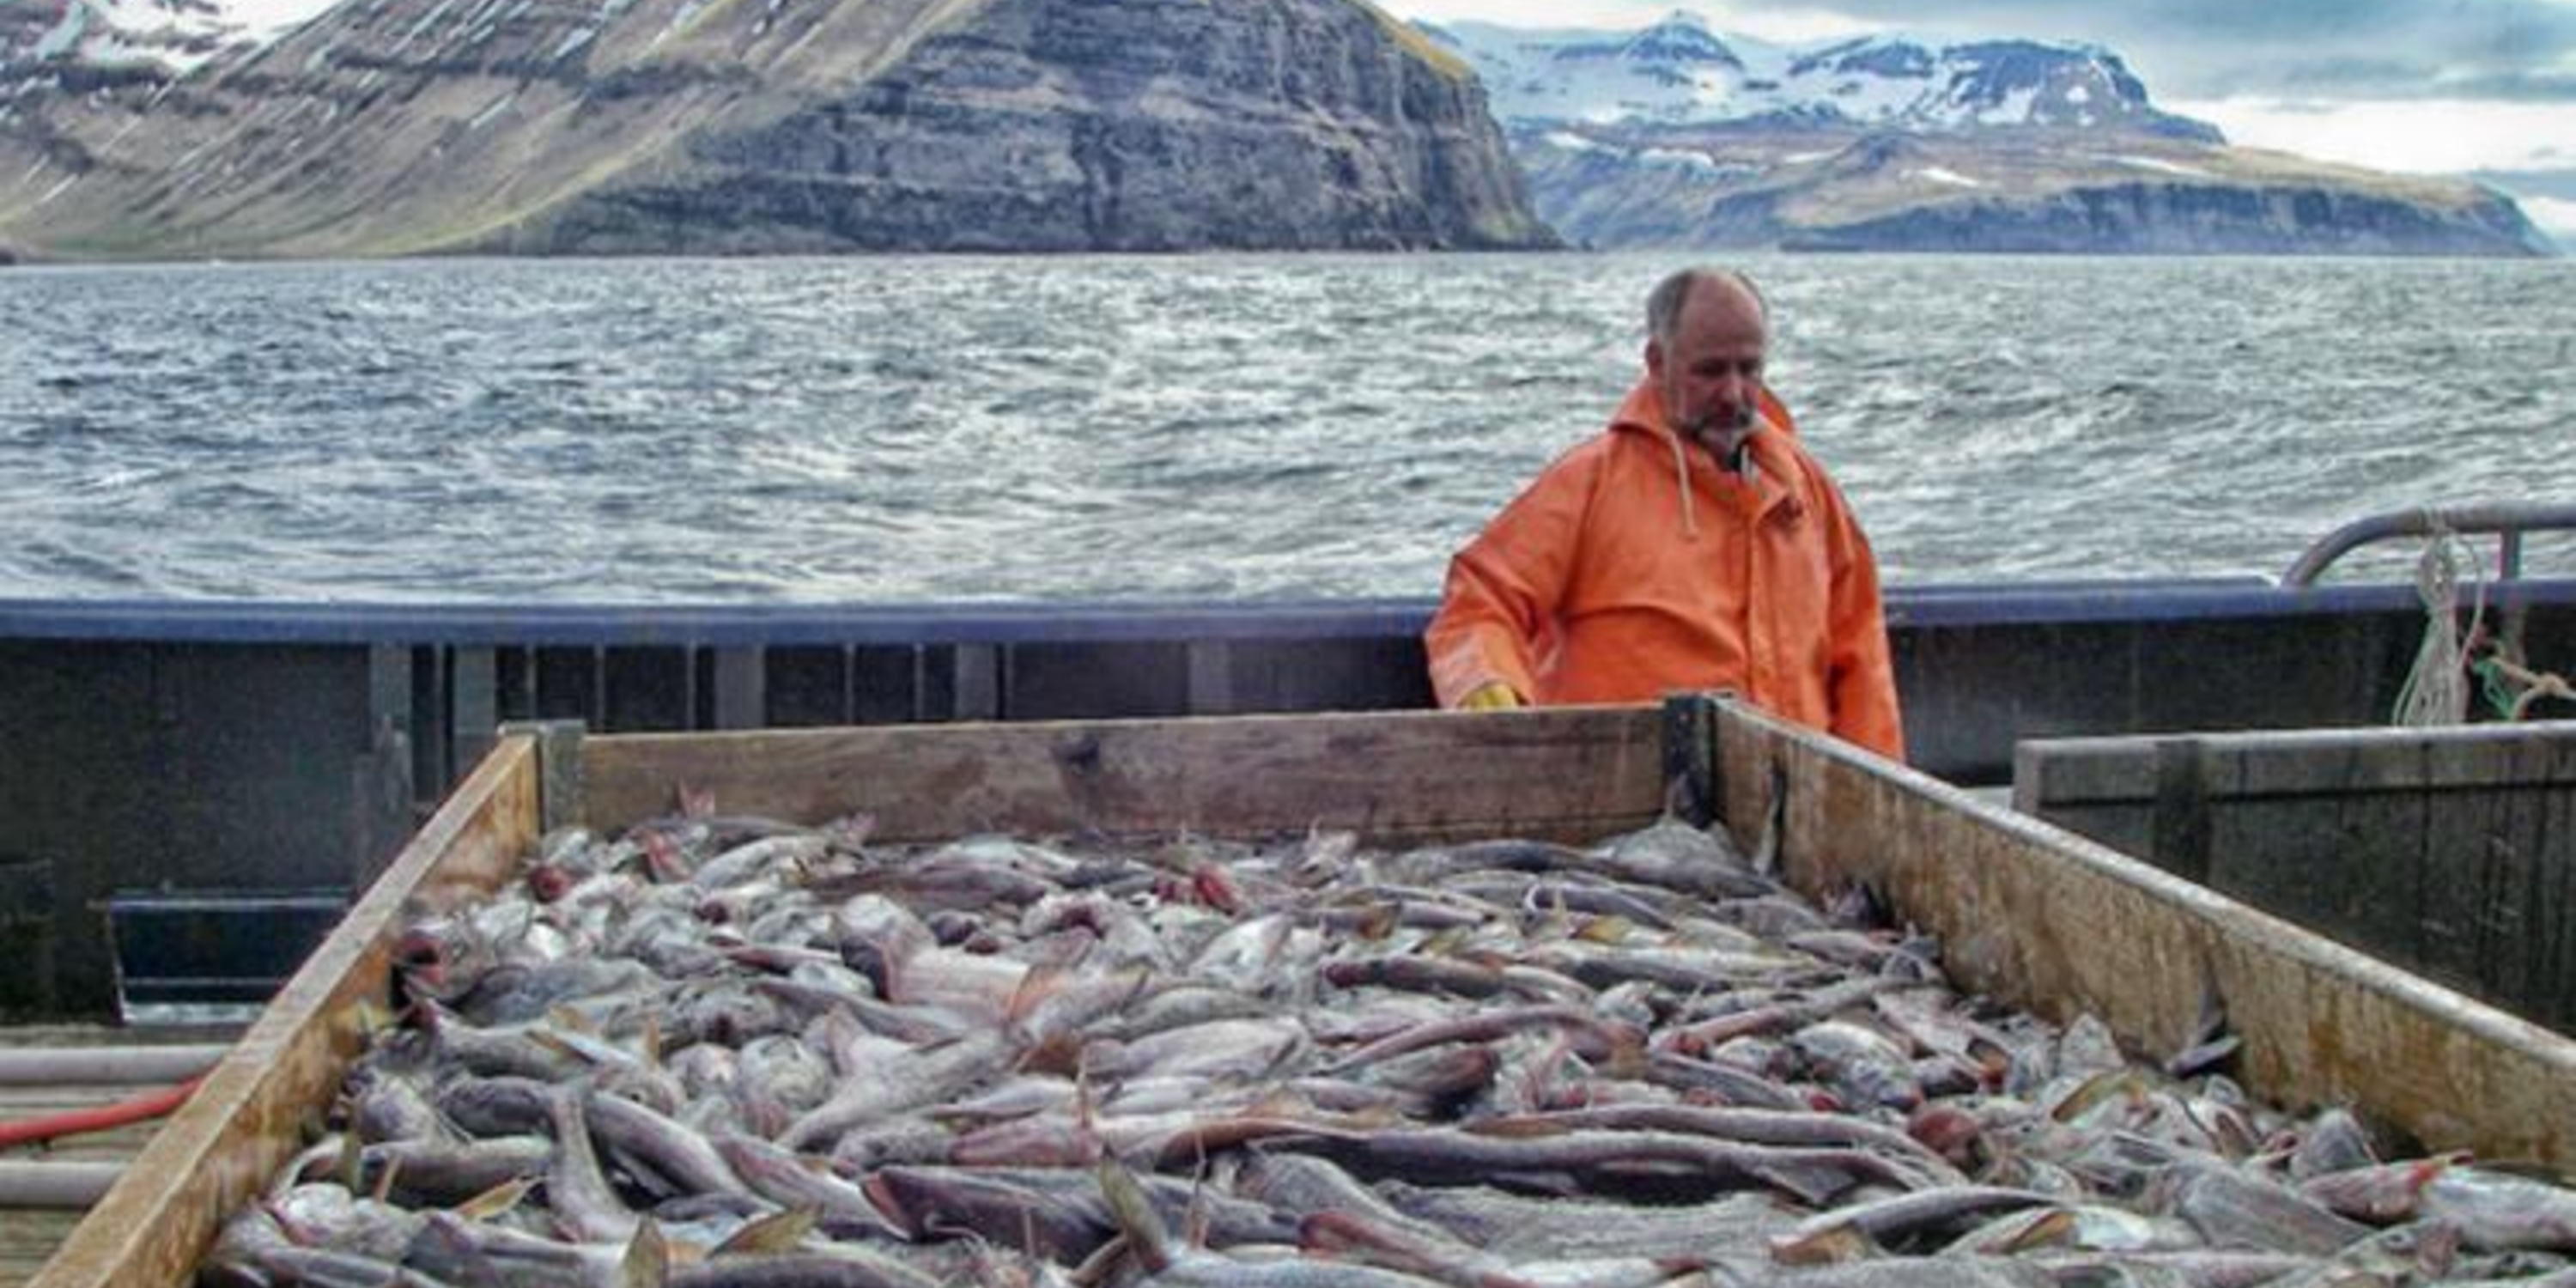 man standing my large container of fish with ocean and mountains in background